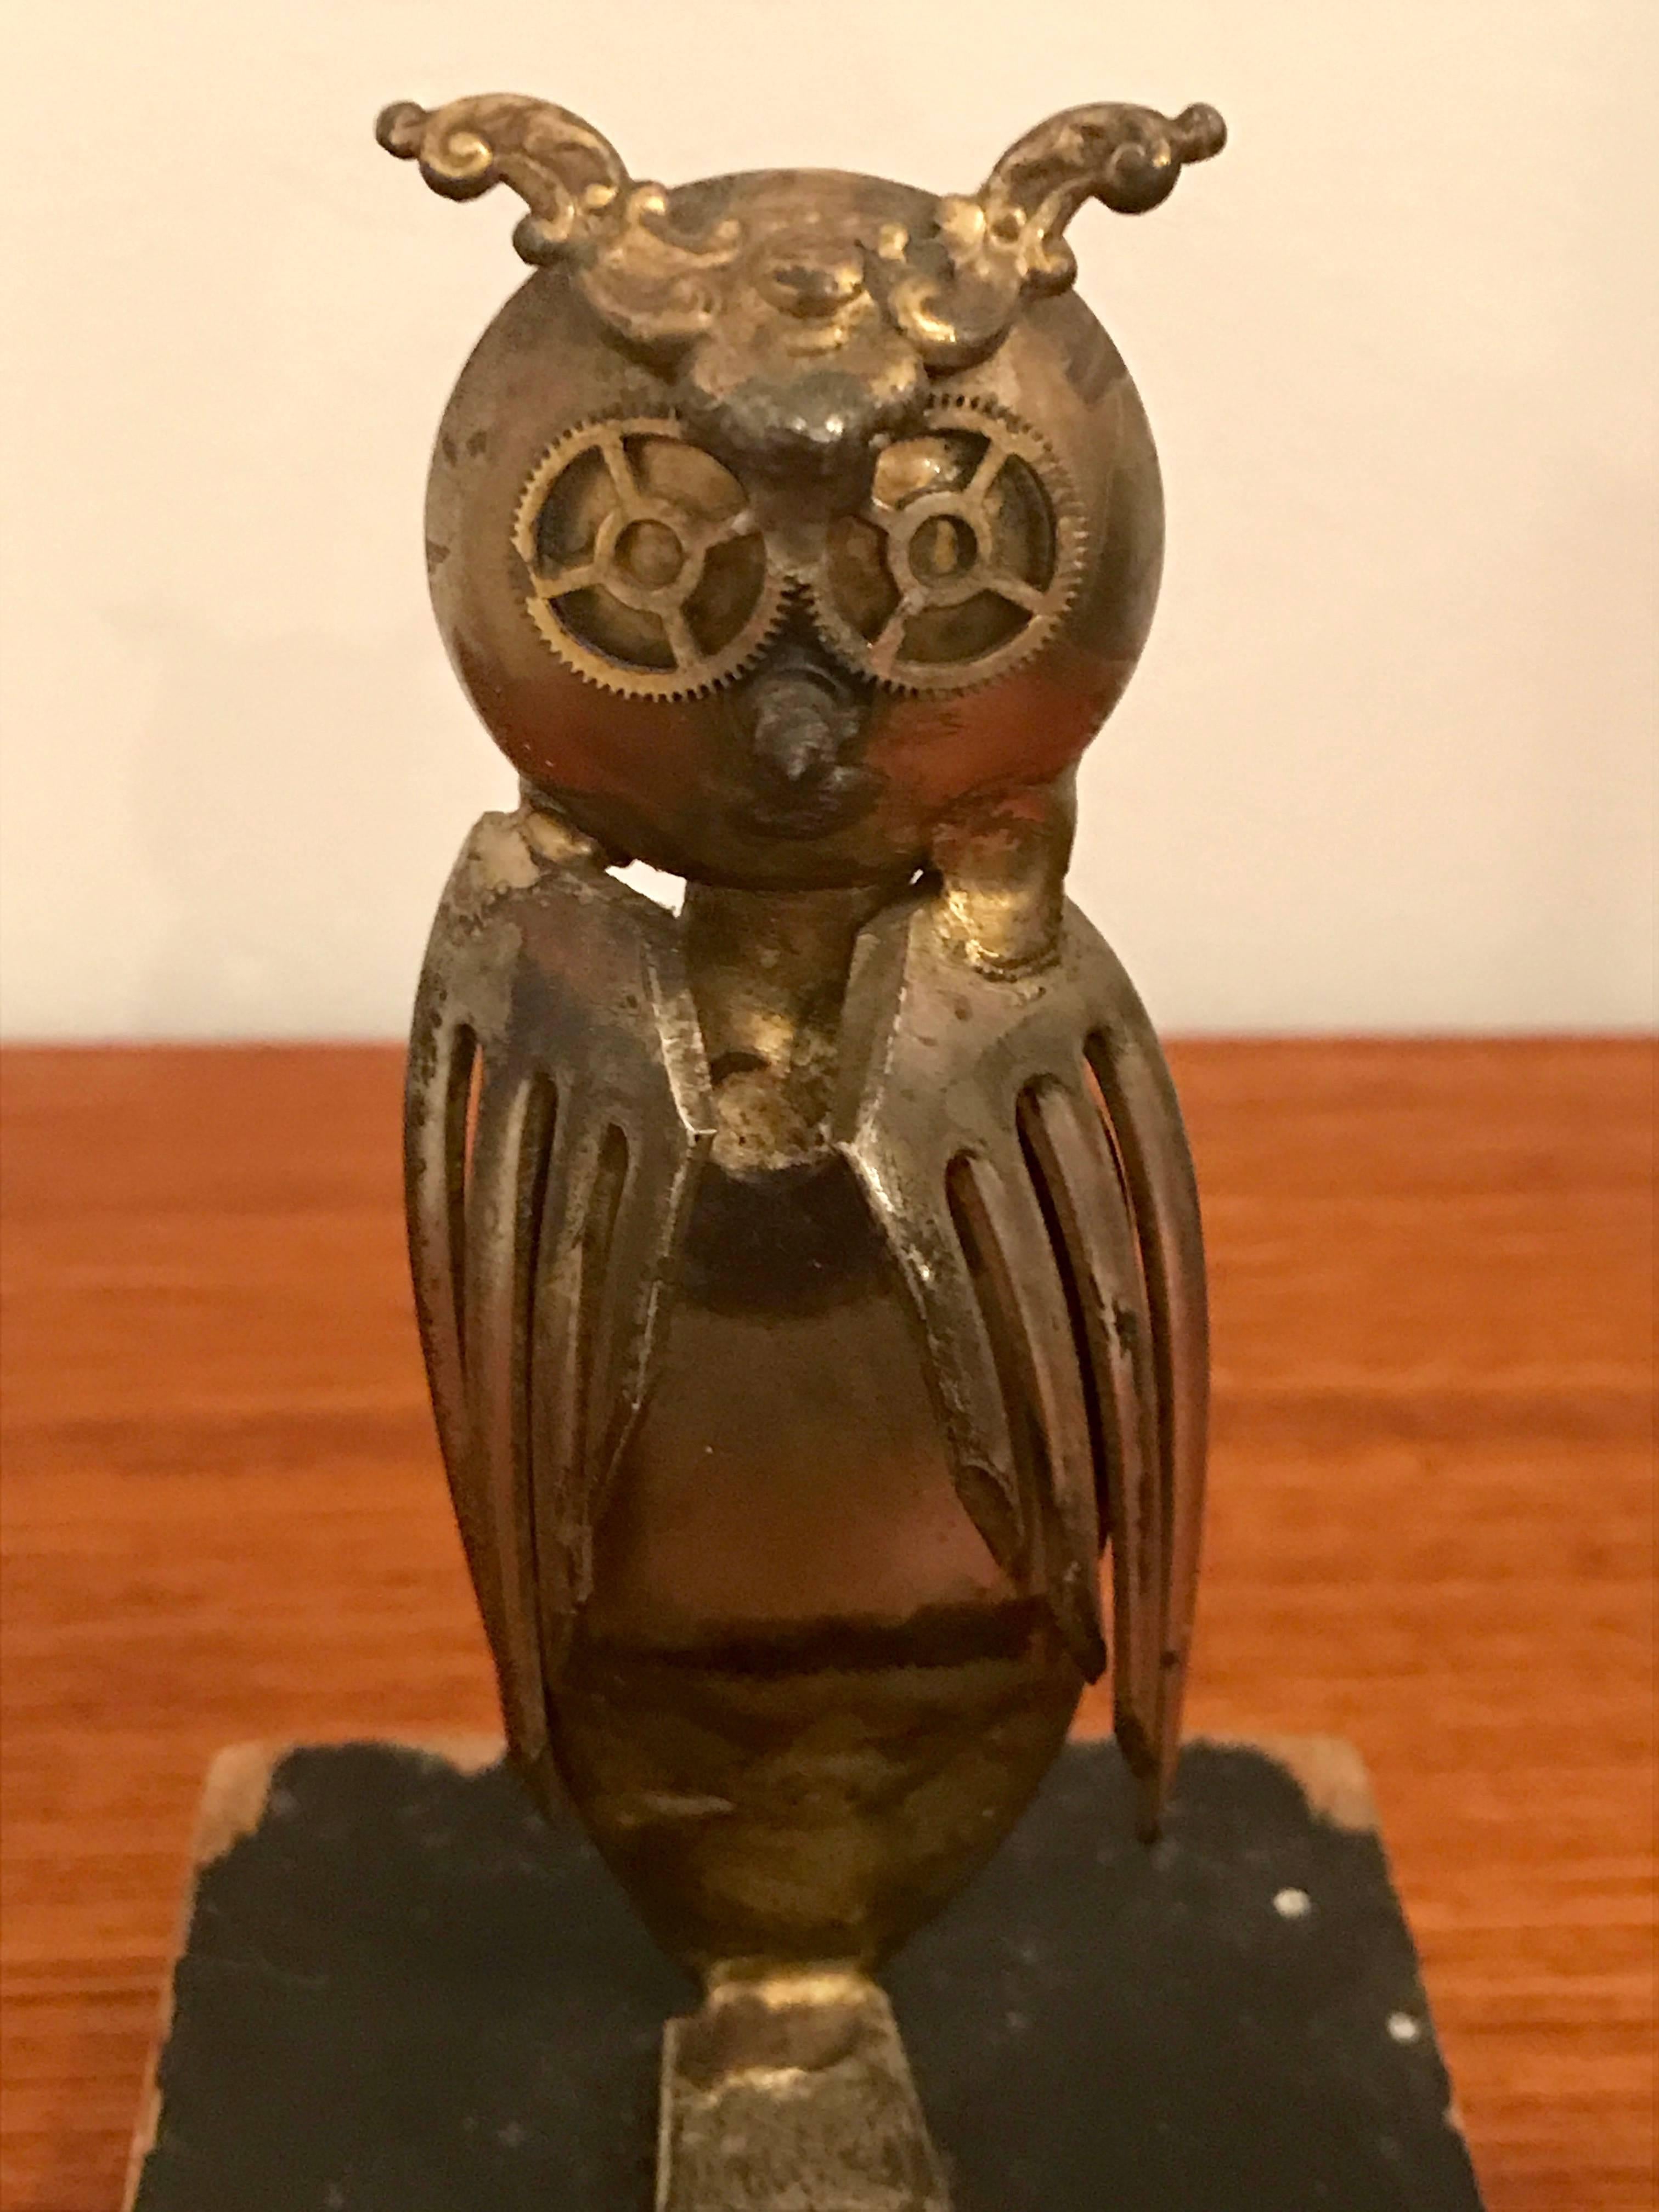 Cute little steampunk brutalist owl sculpture by Casa Del Arte, 1971. Handcrafted using pieces of salad fork, teaspoon, watch gear and wood screw. Mounted on wood base with paint loss. Signed by unknown artist.